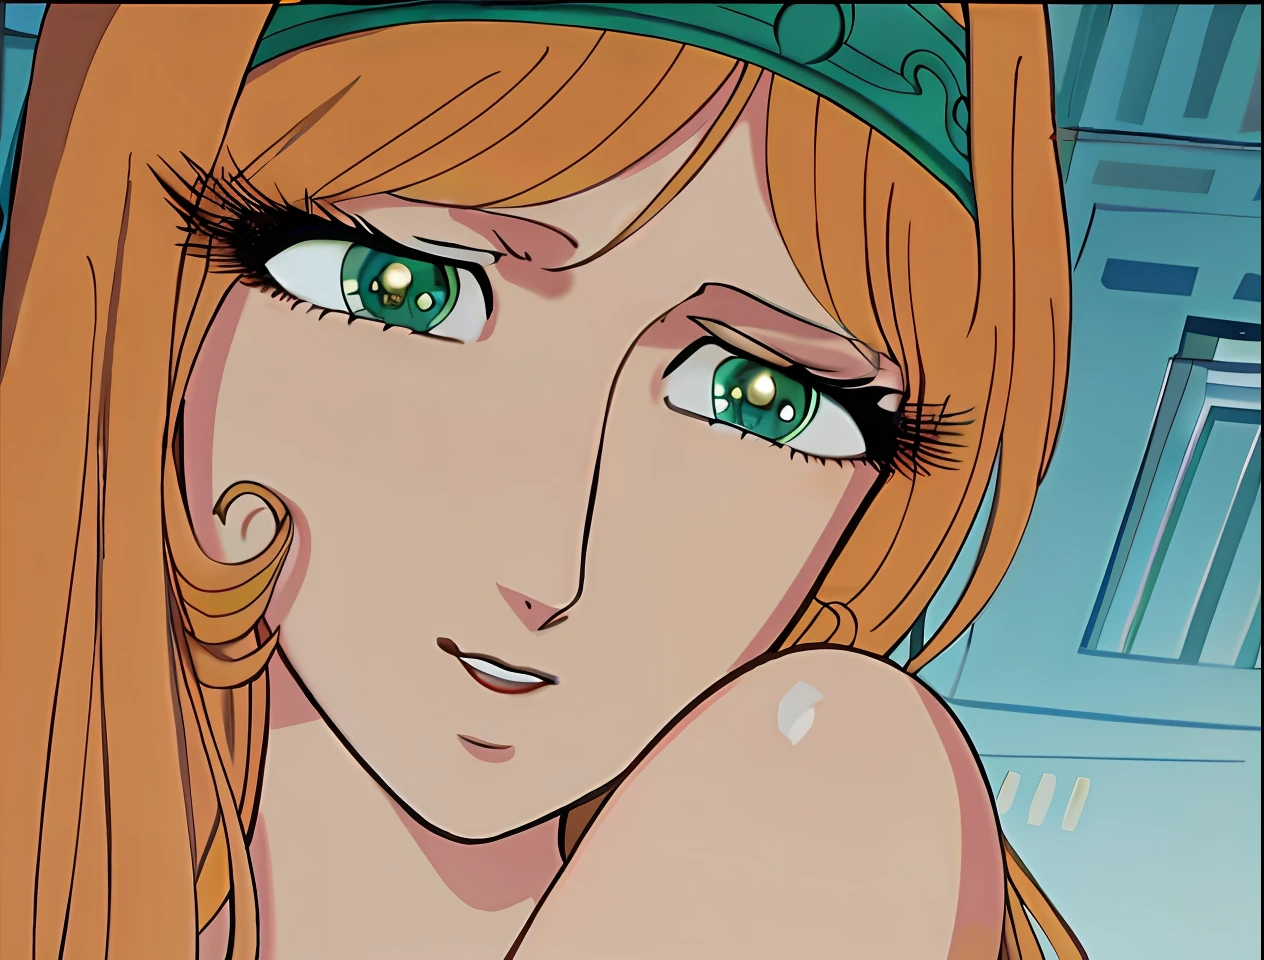 Close up portrait of woman with long hair and green eyes, beautiful portrait of nami, Nami of one piece, nami one piece, Nami, the goddess artemis smirking, gyro zeppeli, close up of a young anime girl, Anime girl named Lucy, from one piece, the sailor galaxia. Beautiful, Gainax anime style, Miura